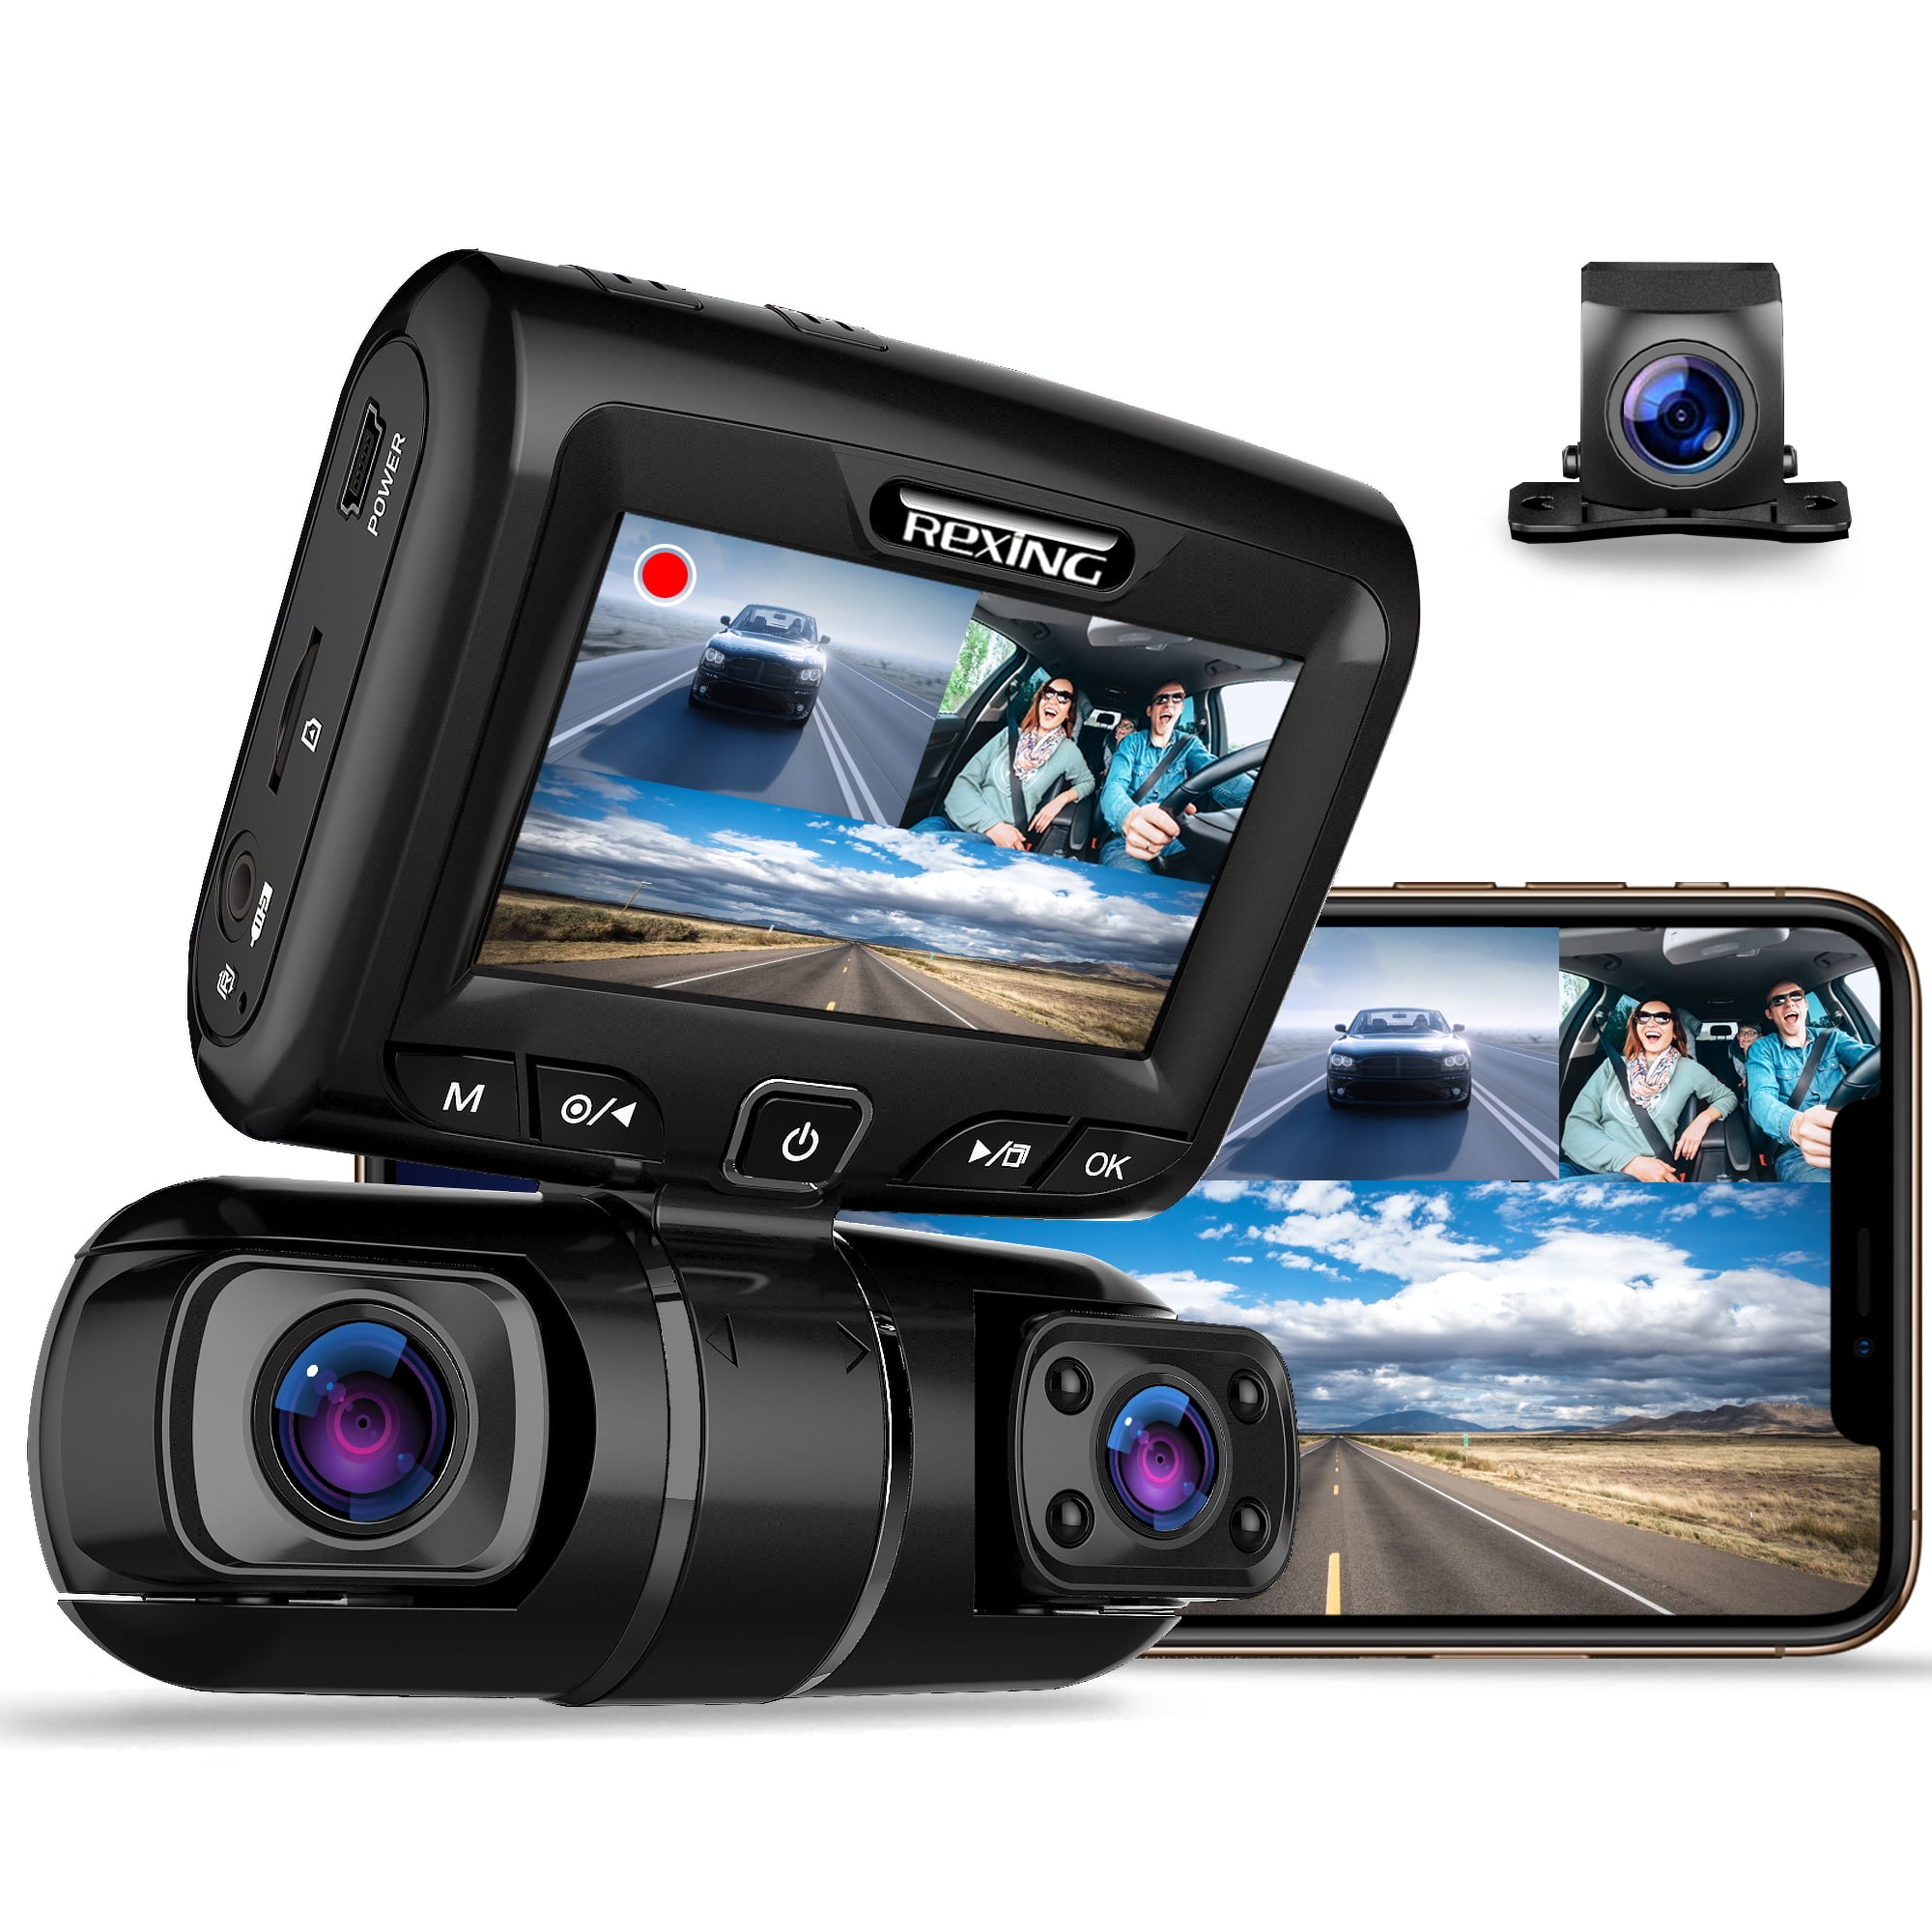 Vantrue S1 4k Dash Cam, Dual 1080P Front and Rear Dash Camera with GPS,  Support 256GB